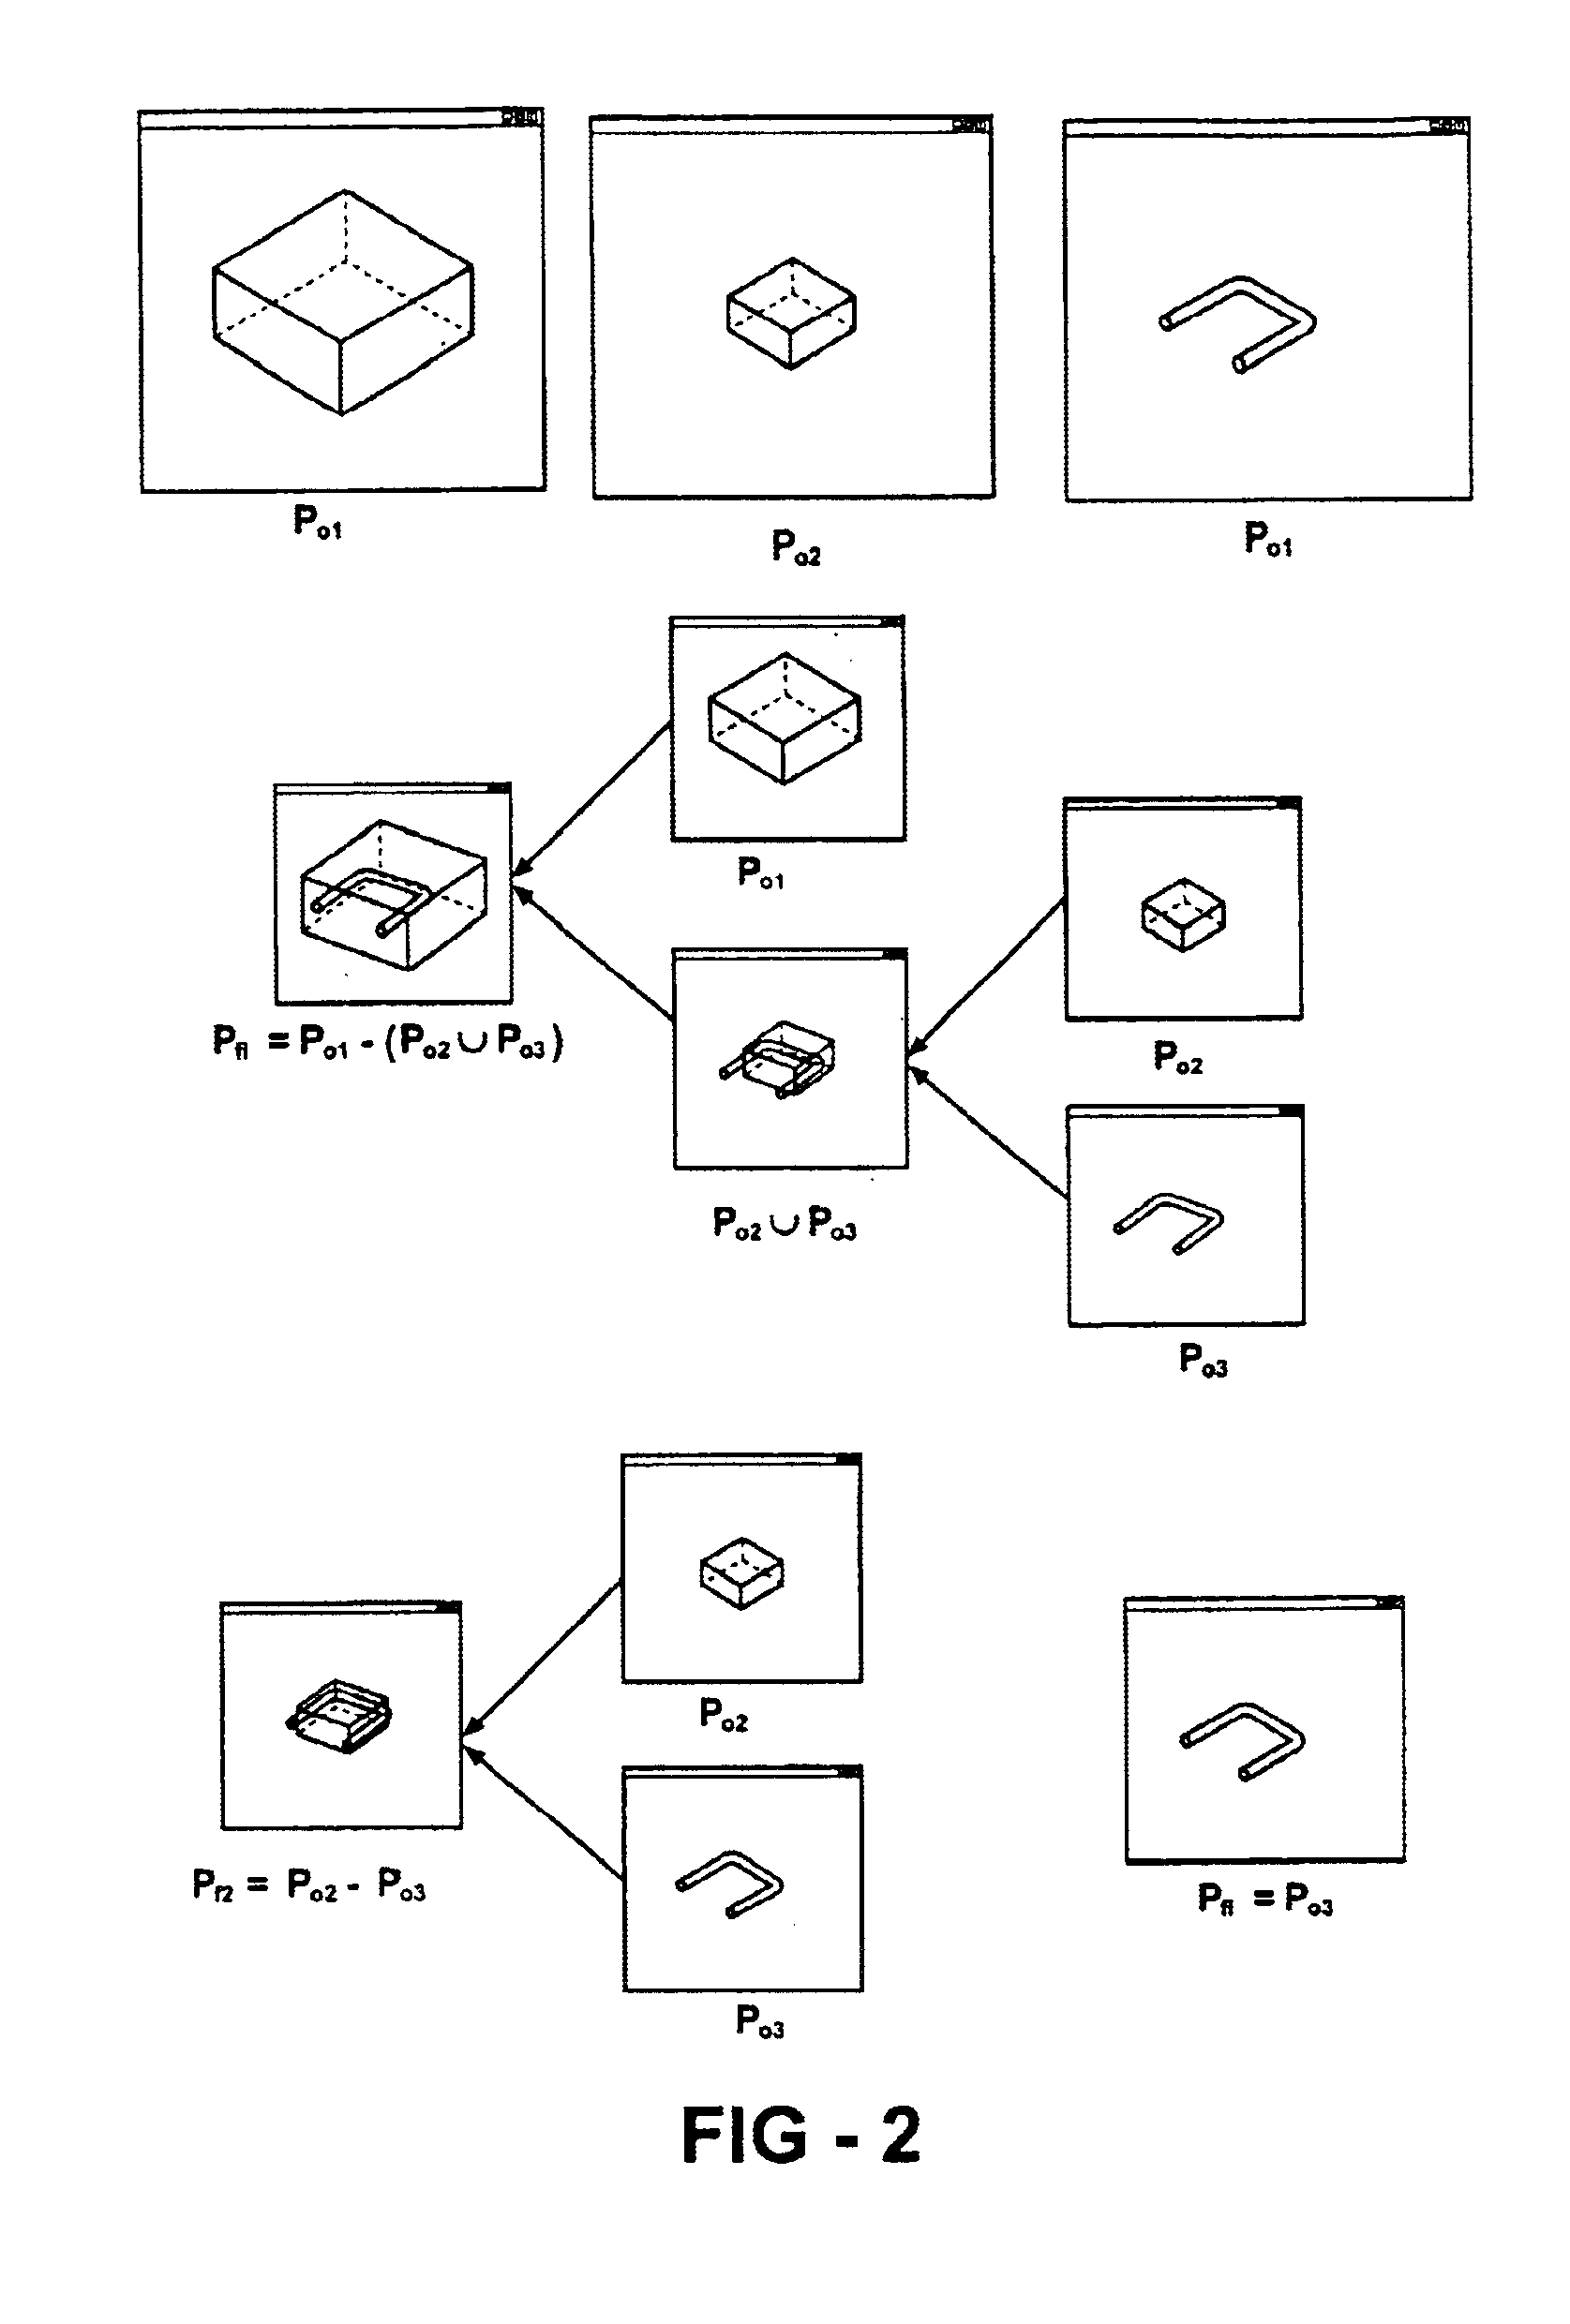 Multi-material toolpath generation for direct metal deposition